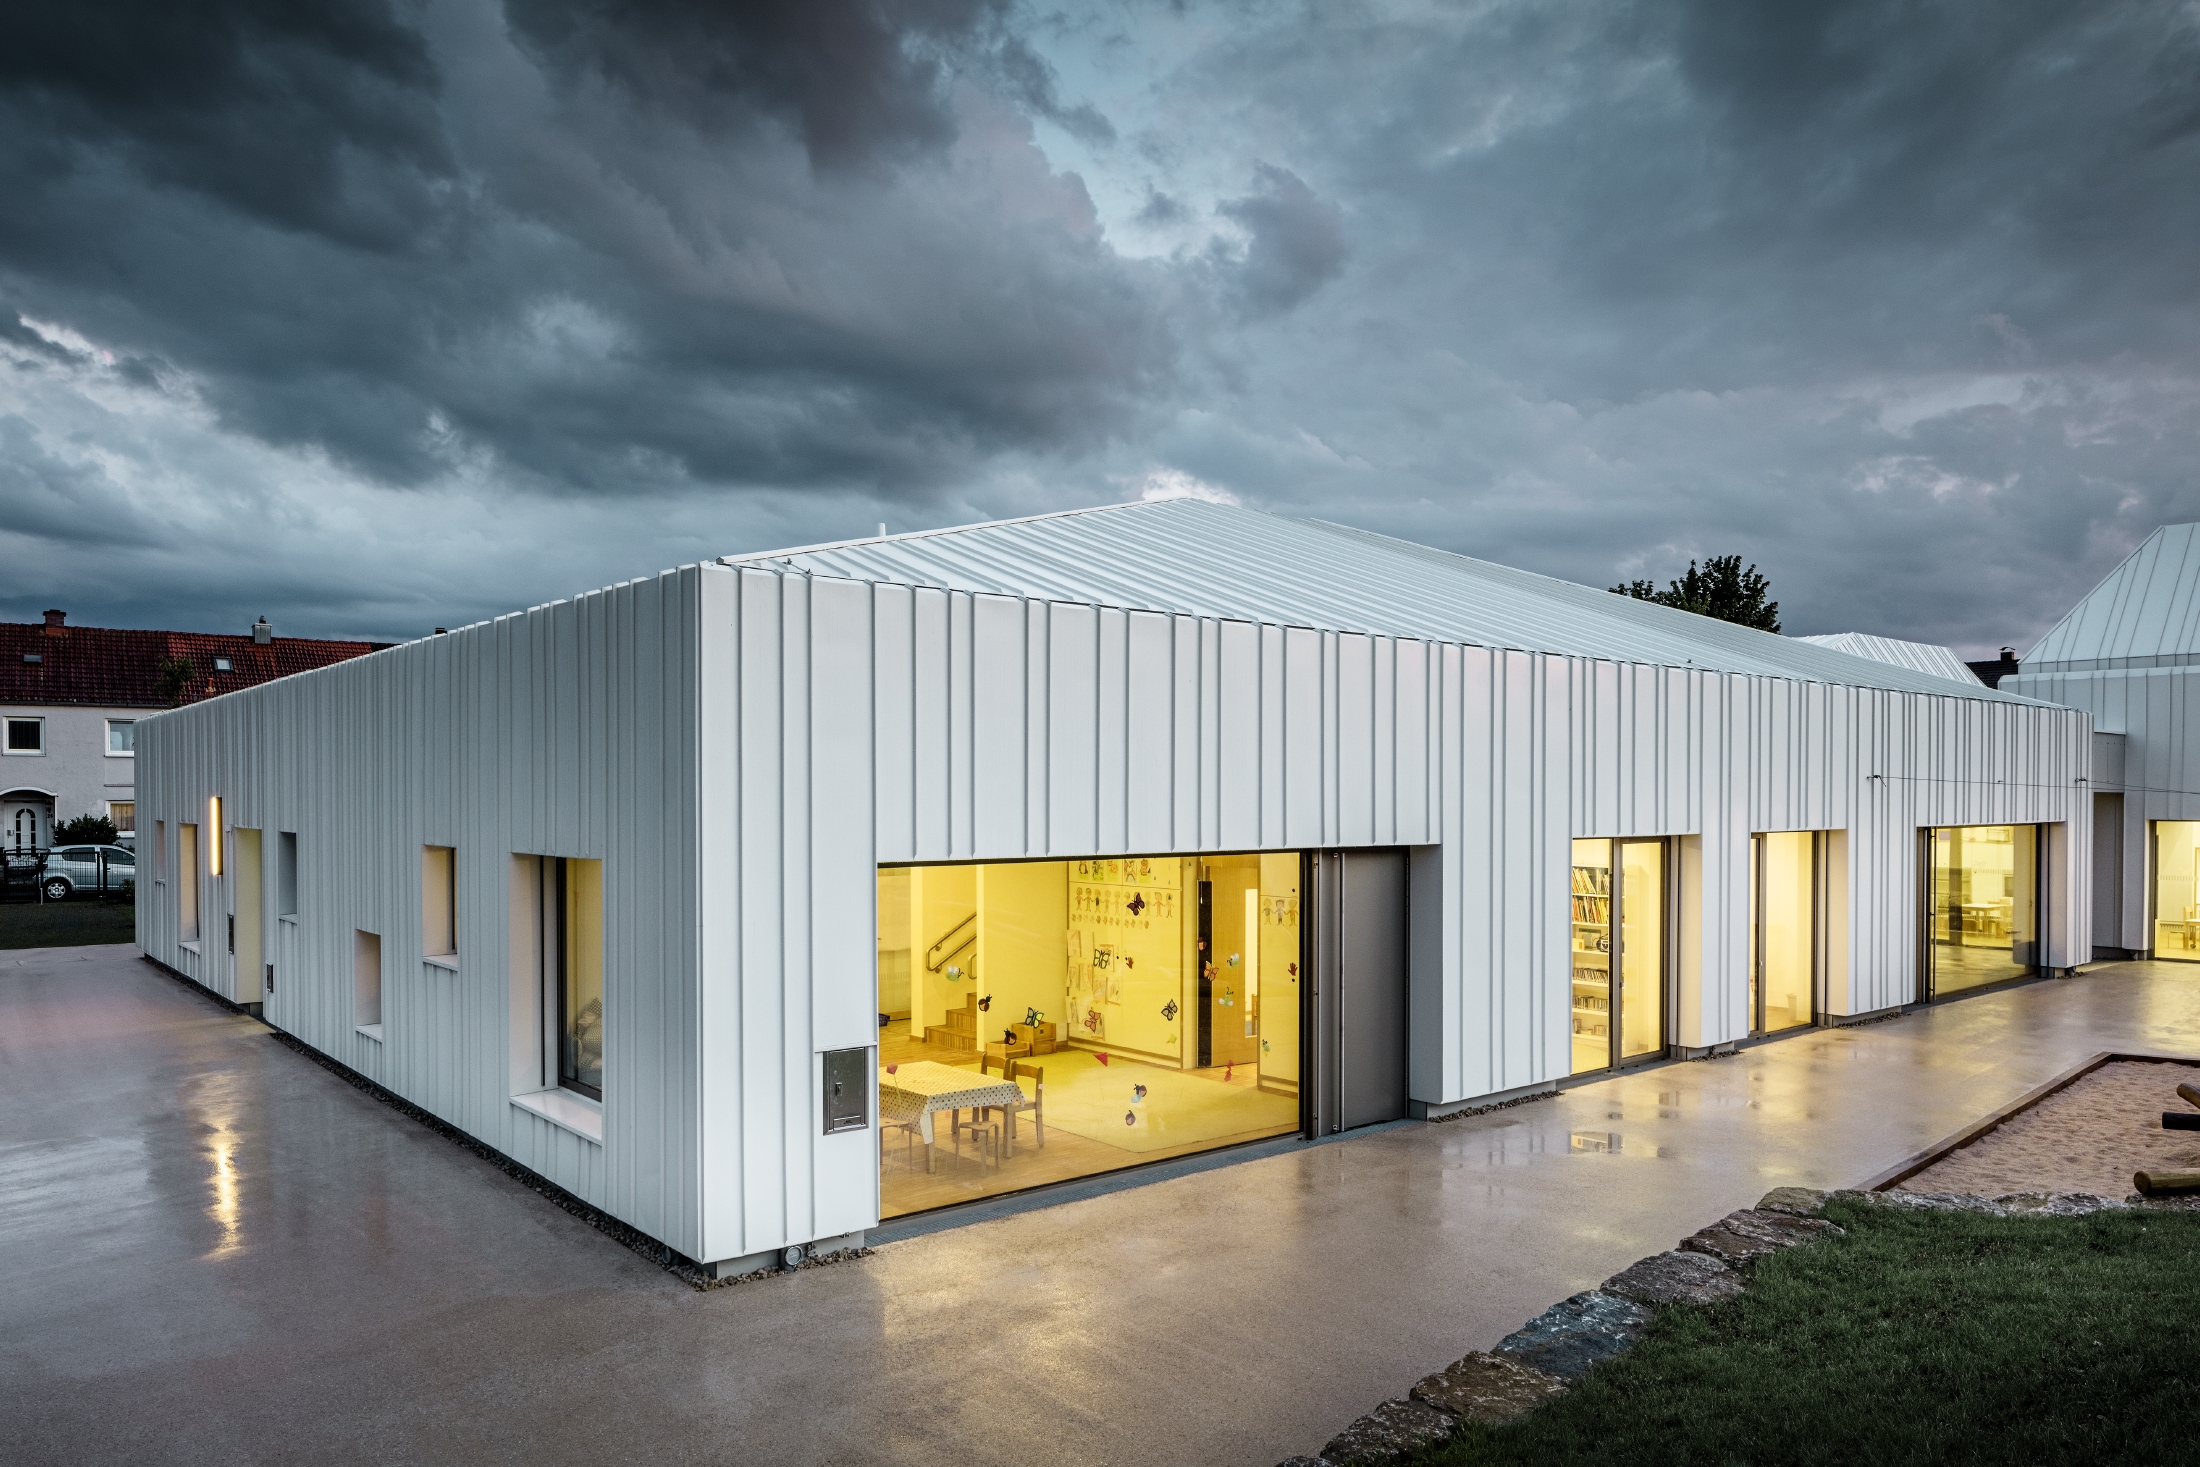 Day nursery in Niederwerrn with PREFALZ roof and façade in pure white with different widths of panels photographed at dusk and in a cloudy atmosphere